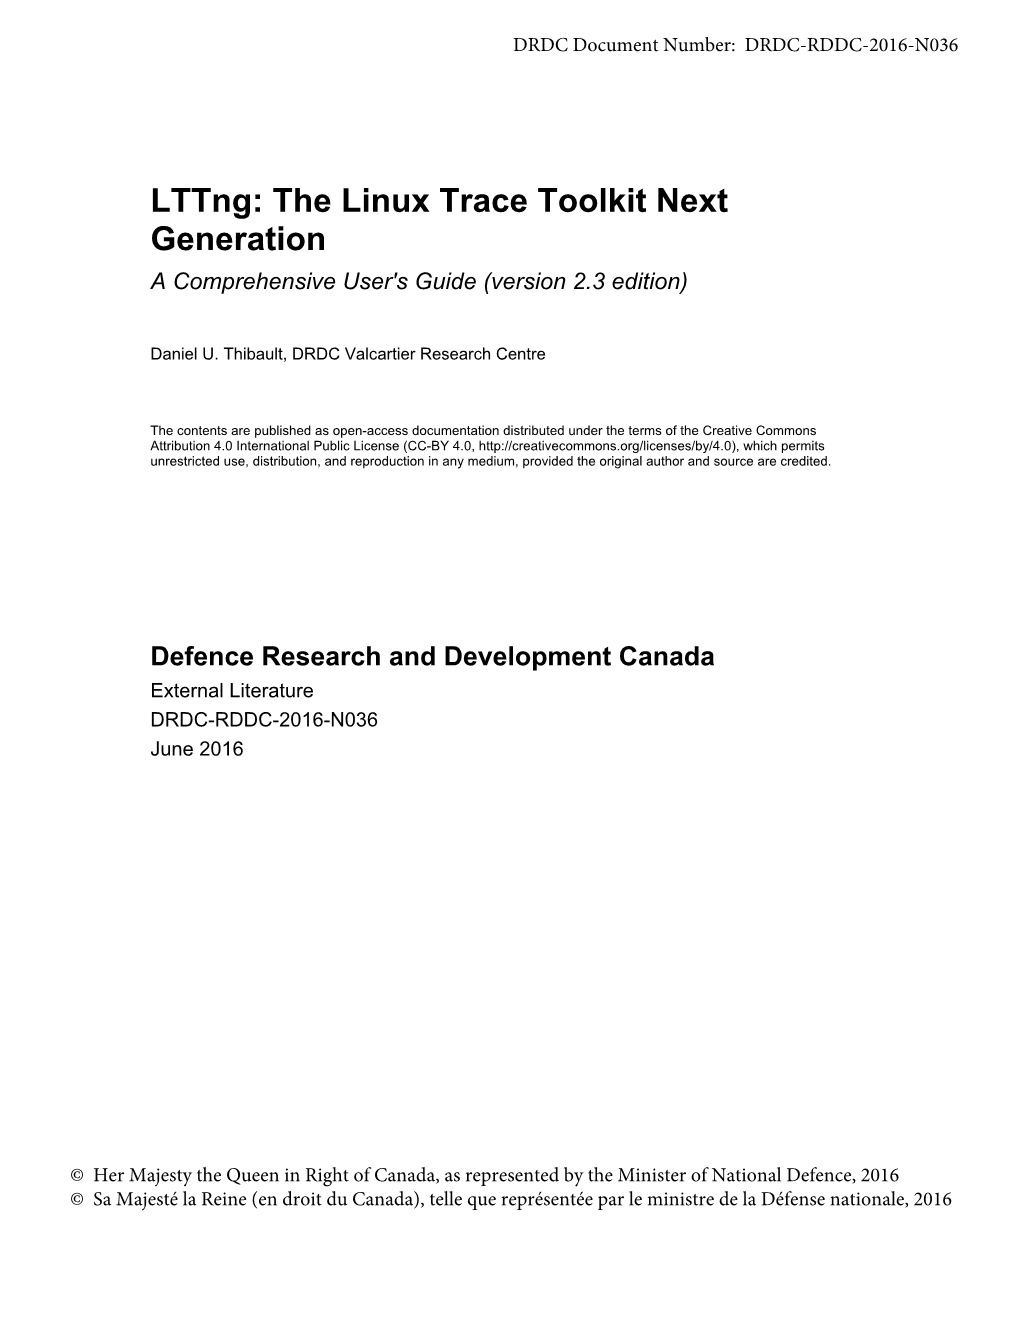 Lttng: the Linux Trace Toolkit Next Generation a Comprehensive User's Guide (Version 2.3 Edition)